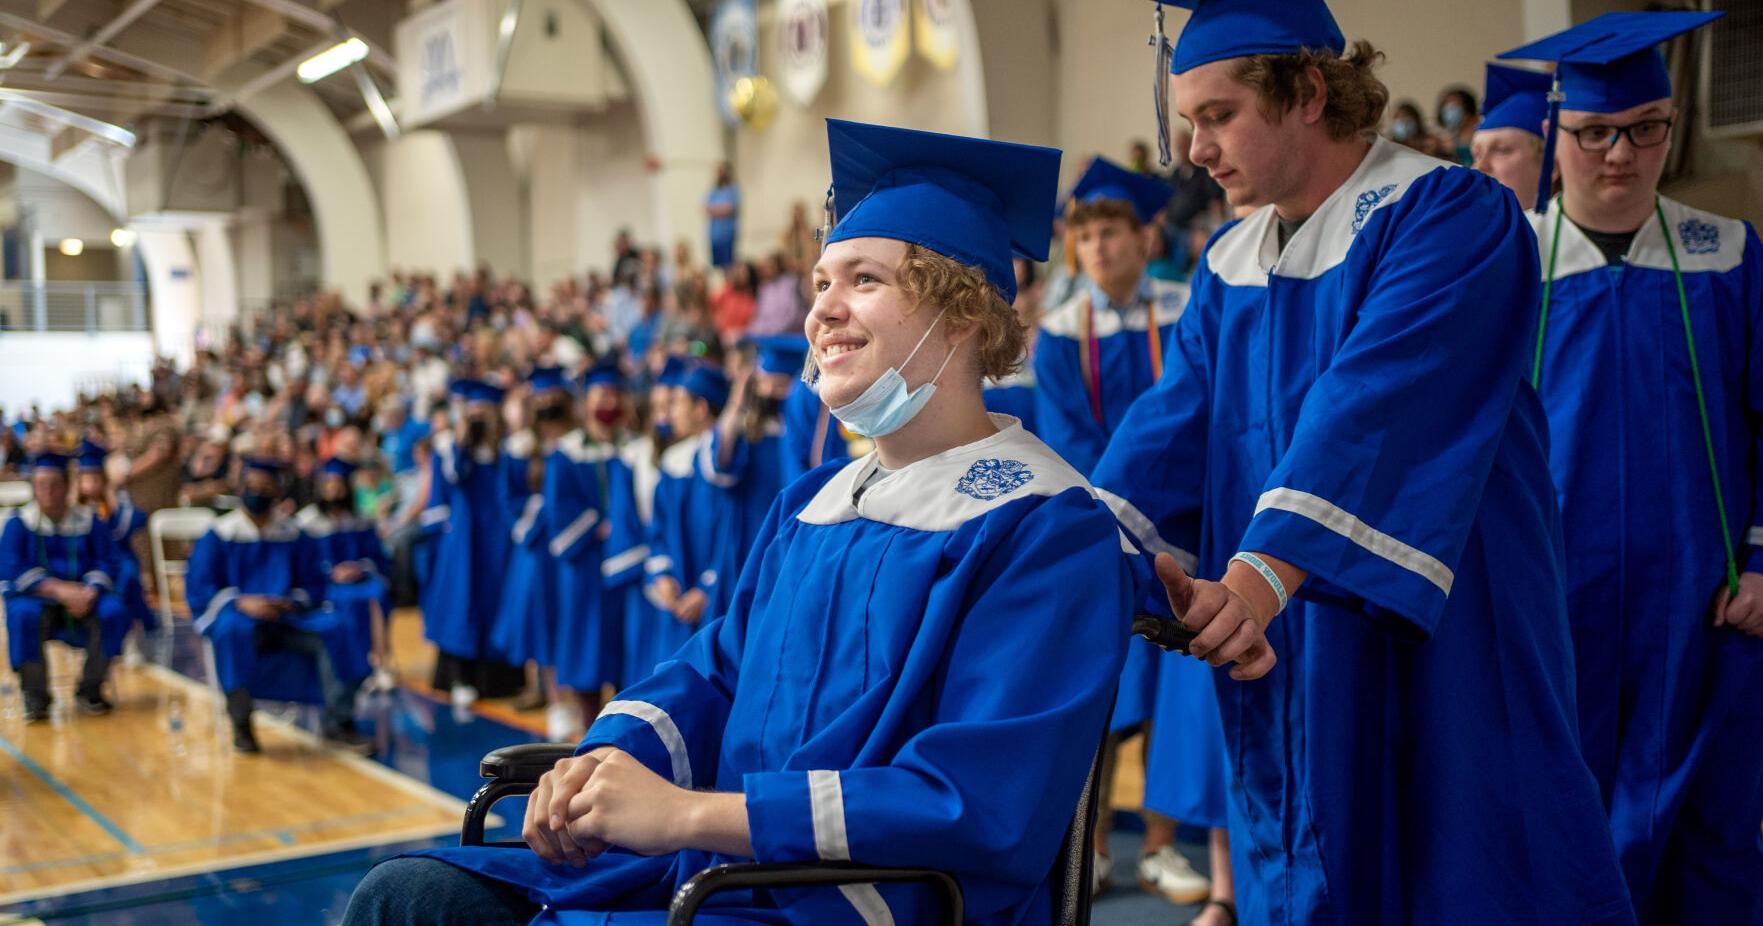 Despite challenging school year, Oregon graduation rates dropped only slightly